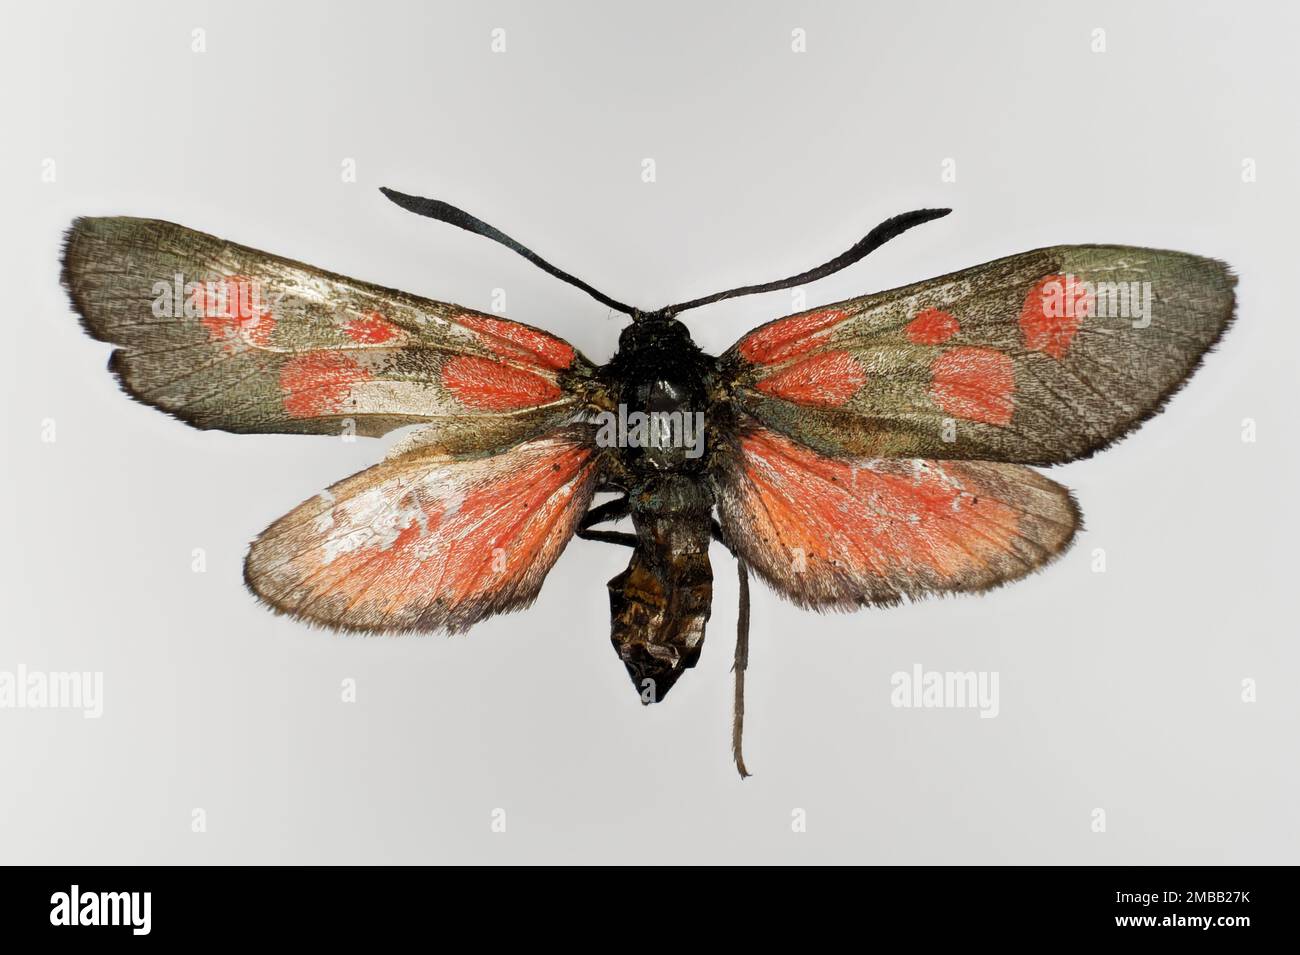 Narrow-bordered five-spot burnet, Zygaena lonicerae (family Zygaenidae), a butterfly, 50 years old specimen from butterfly collection. Stock Photo